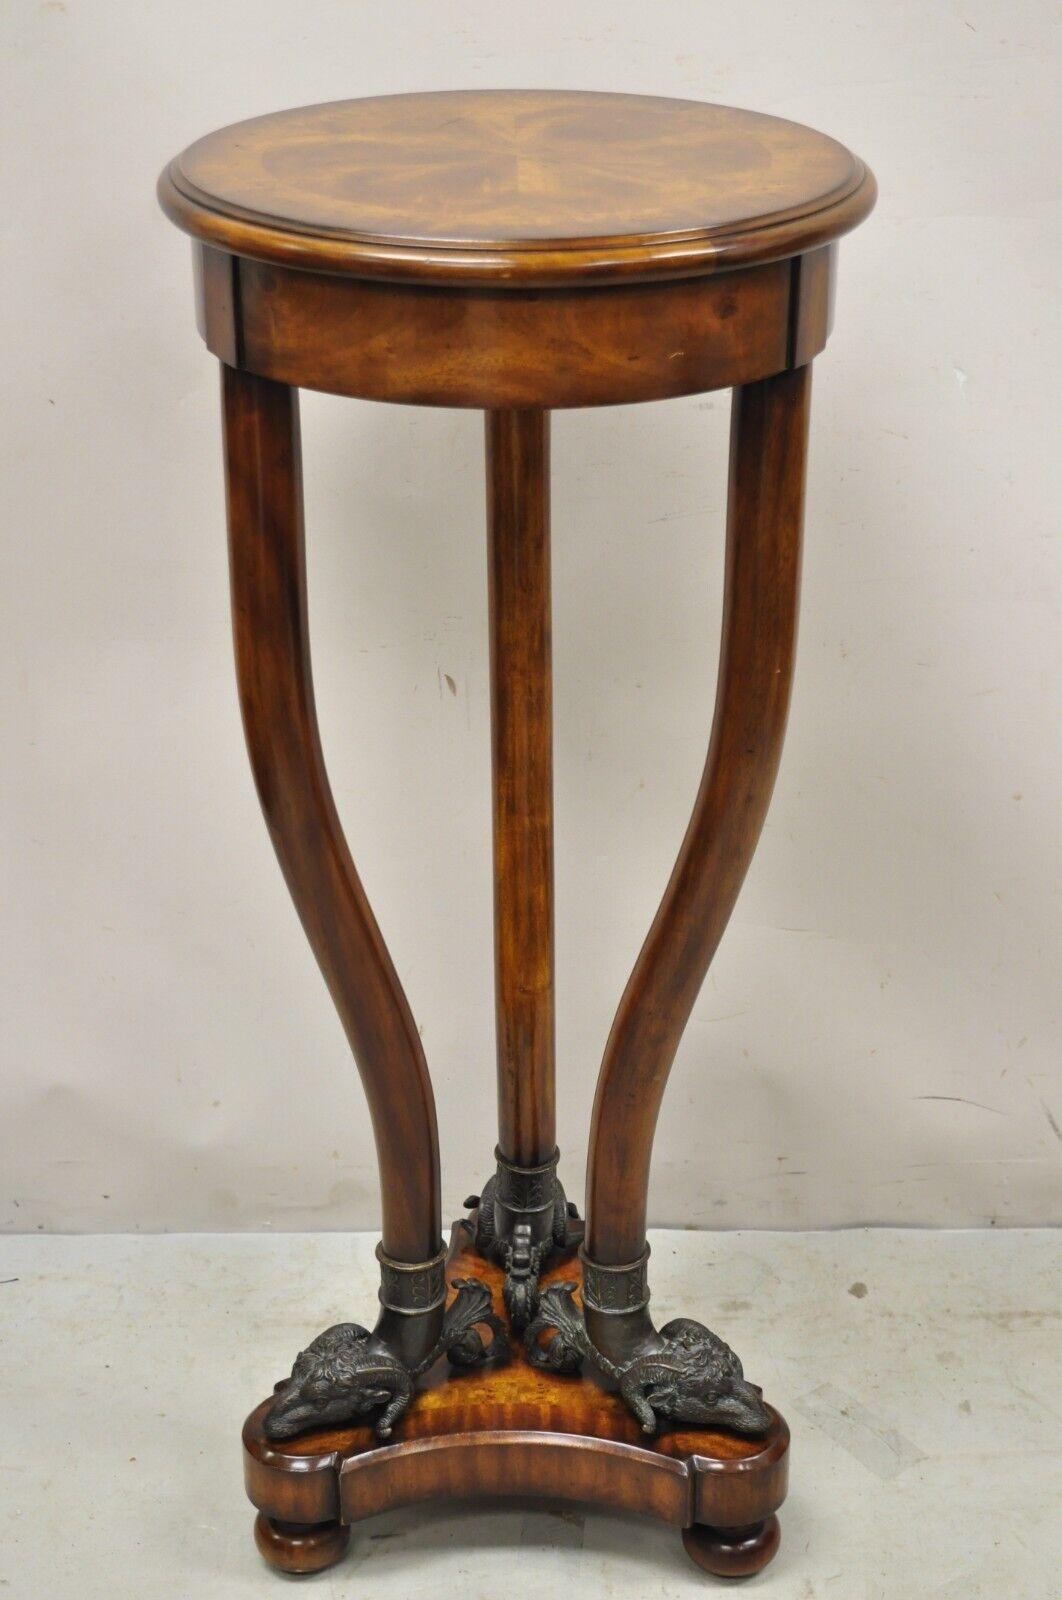 Theodore Alexander Regency Style Mahogany Tripod Pedestal Plant stand with Bronze Rams. Item features cast bronze figural rams head tripod base, beautiful wood grain, original label, very nice vintage item, great style and form. circa Late 20th